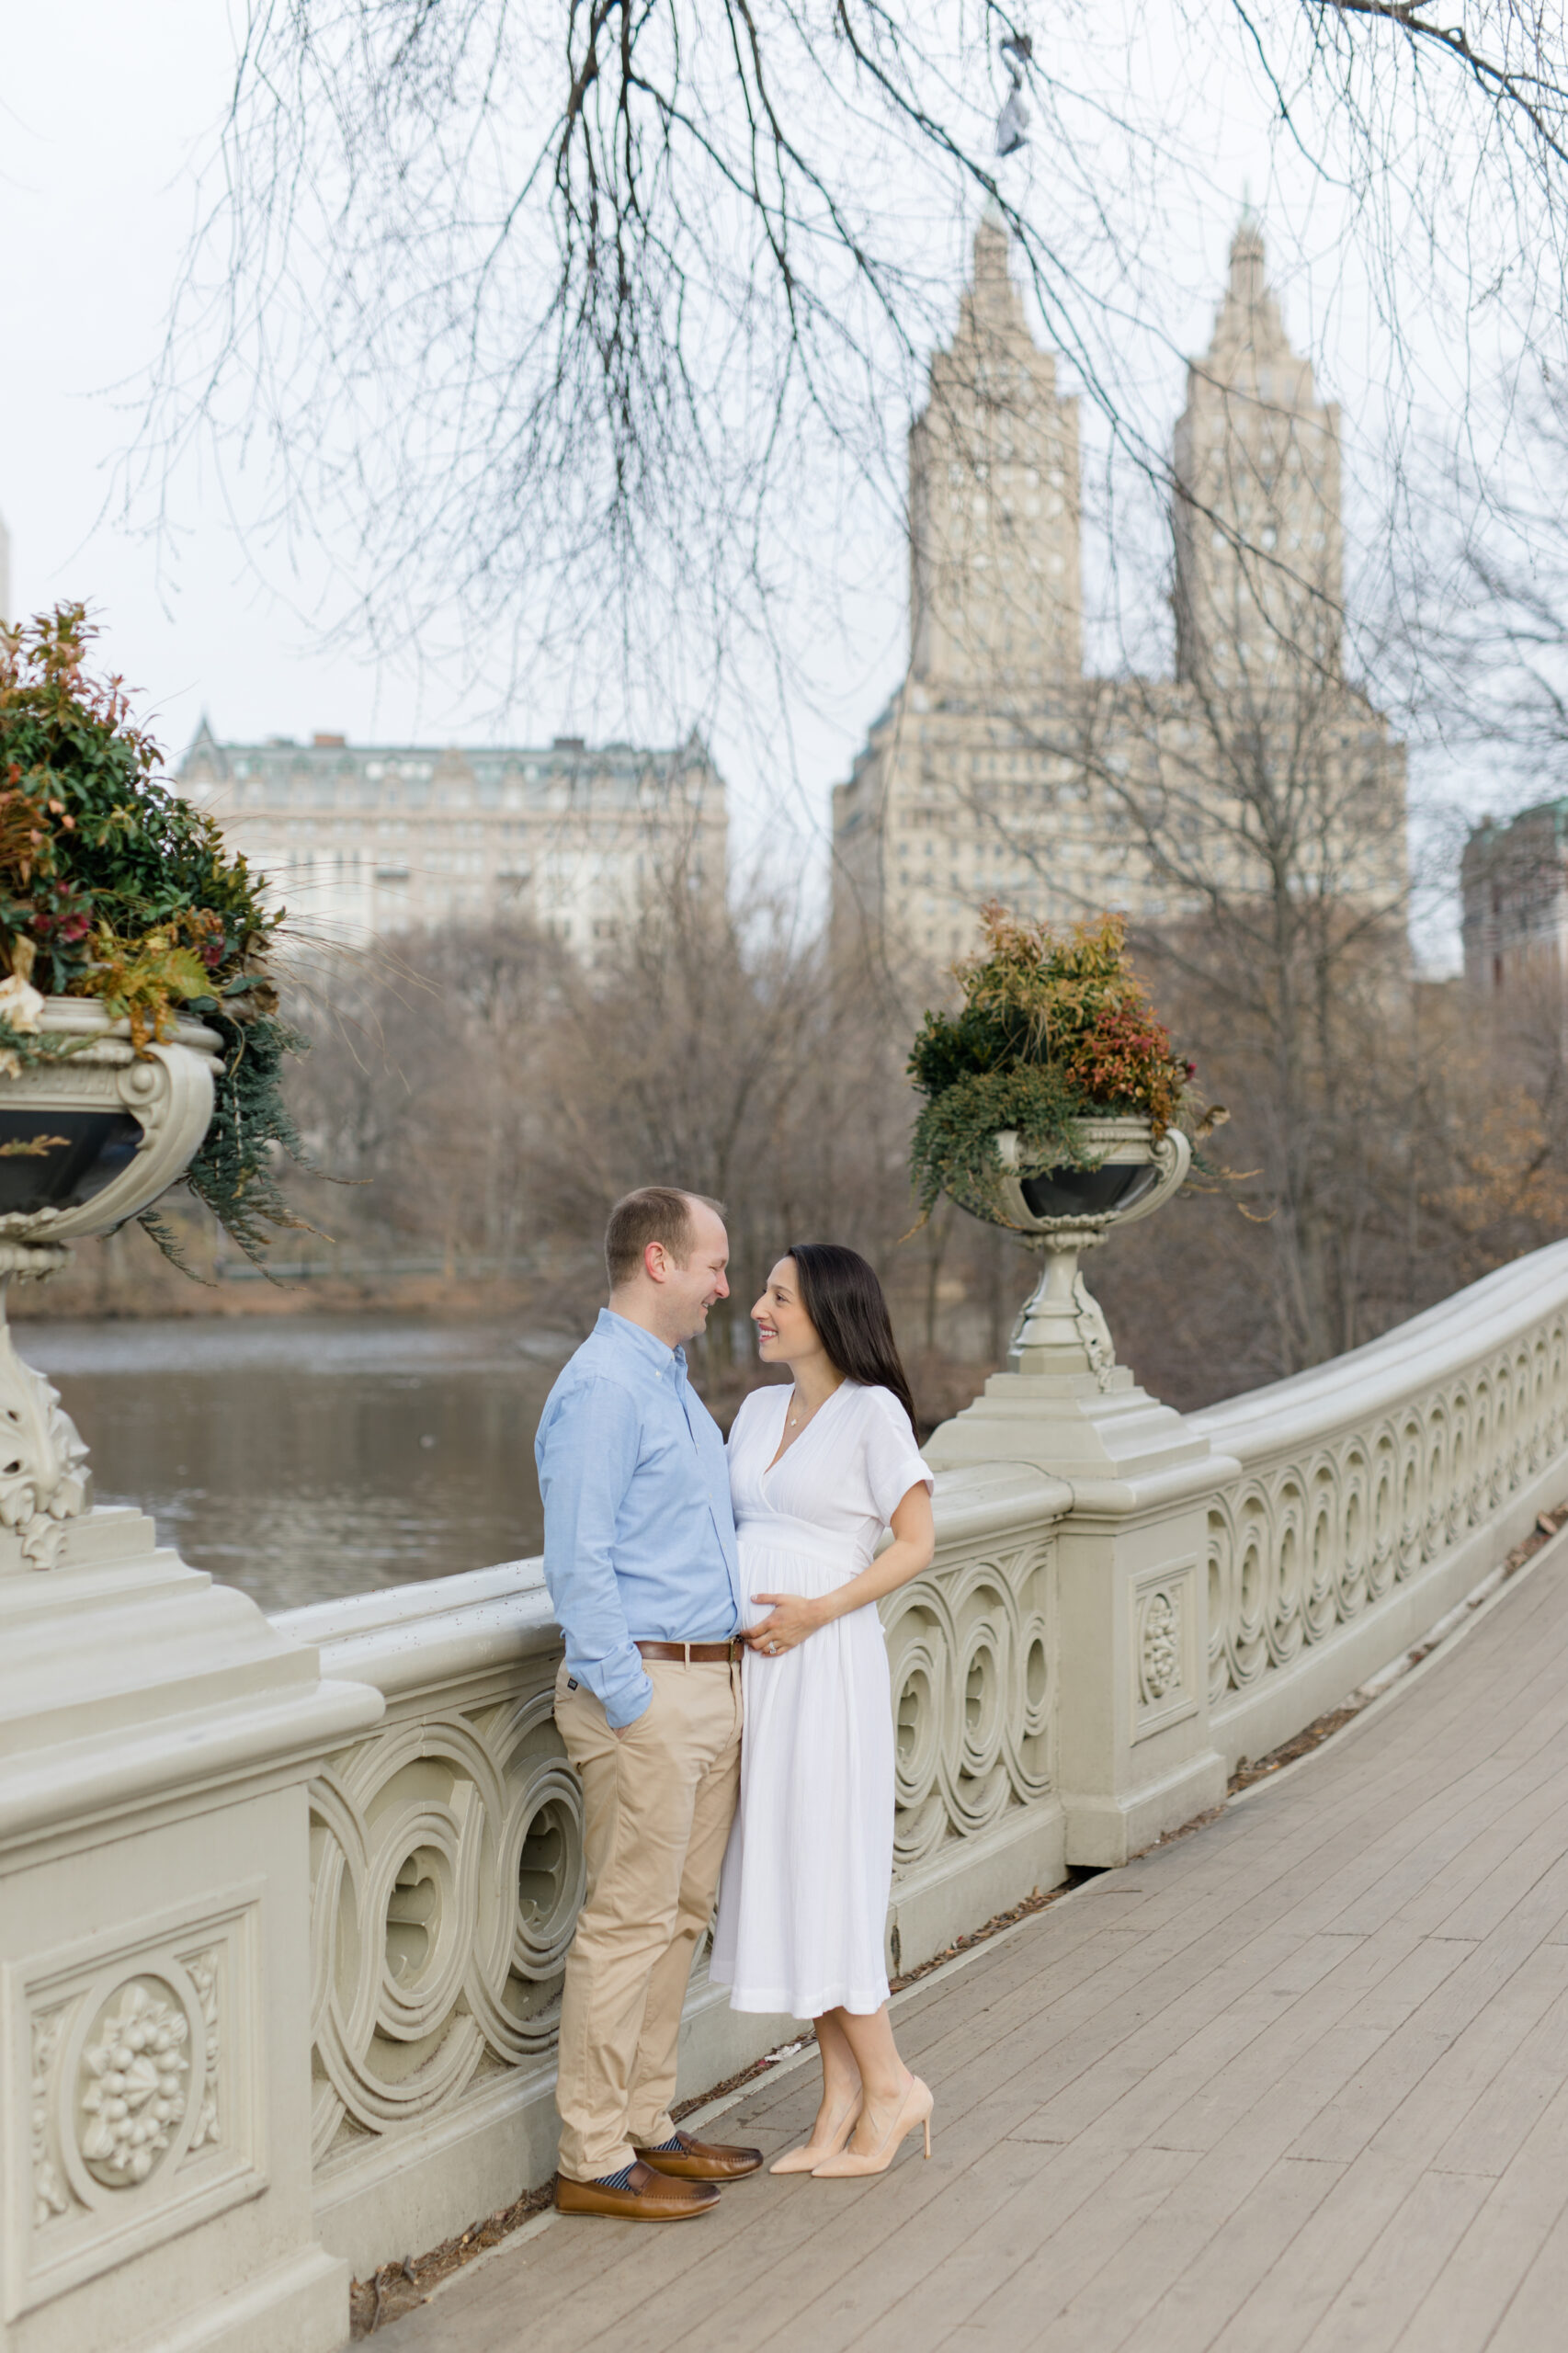 A couple laugh in Central Park during a New York City maternity photography session with Jacqueline Clair Photography